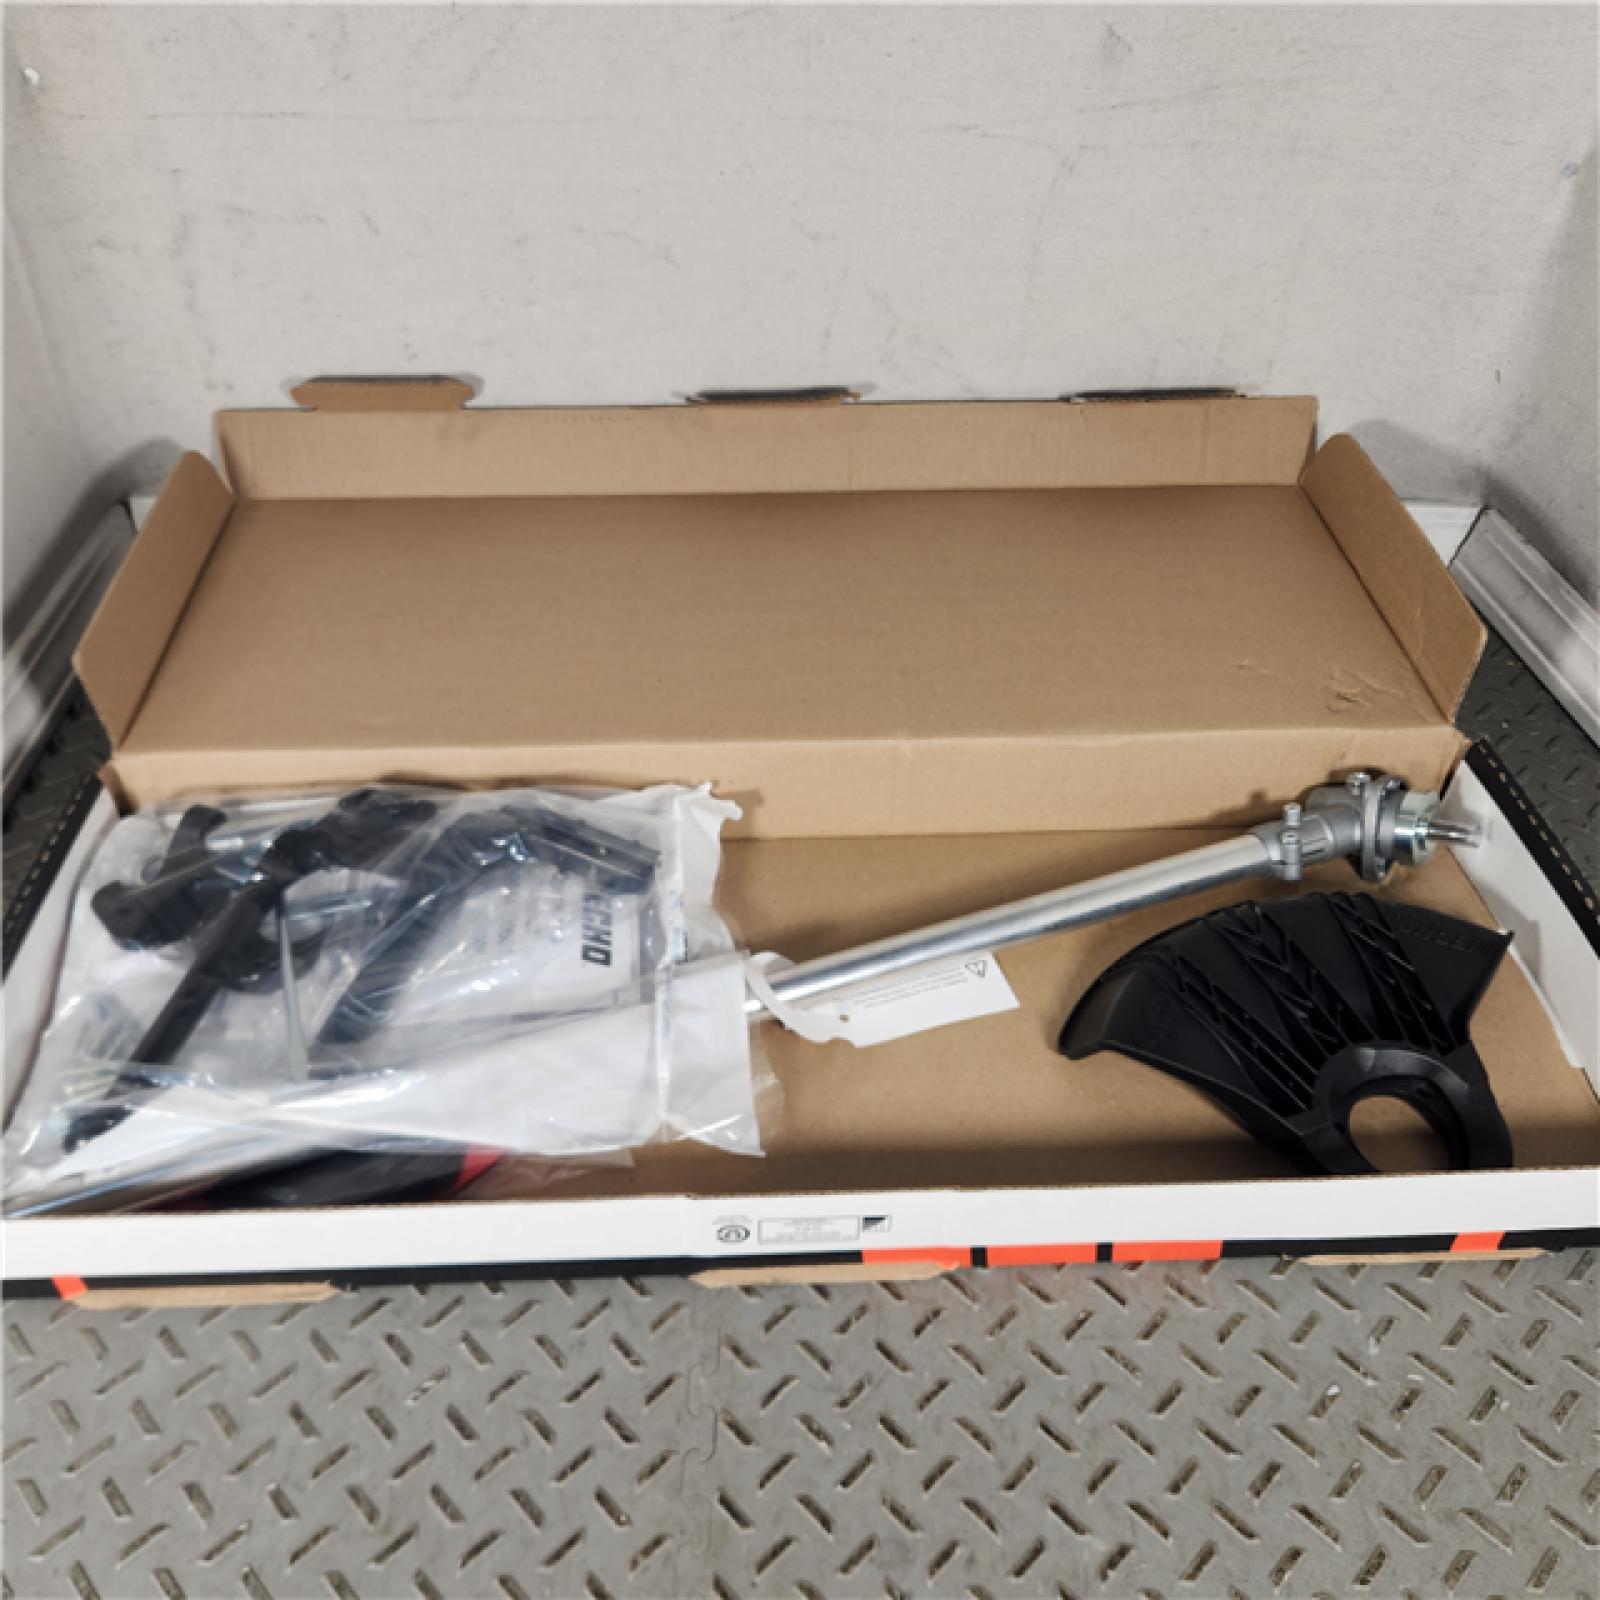 Houston Location - AS-IS Echo 99944200601 Brushcutter Attachment - Appears IN NEW Condition